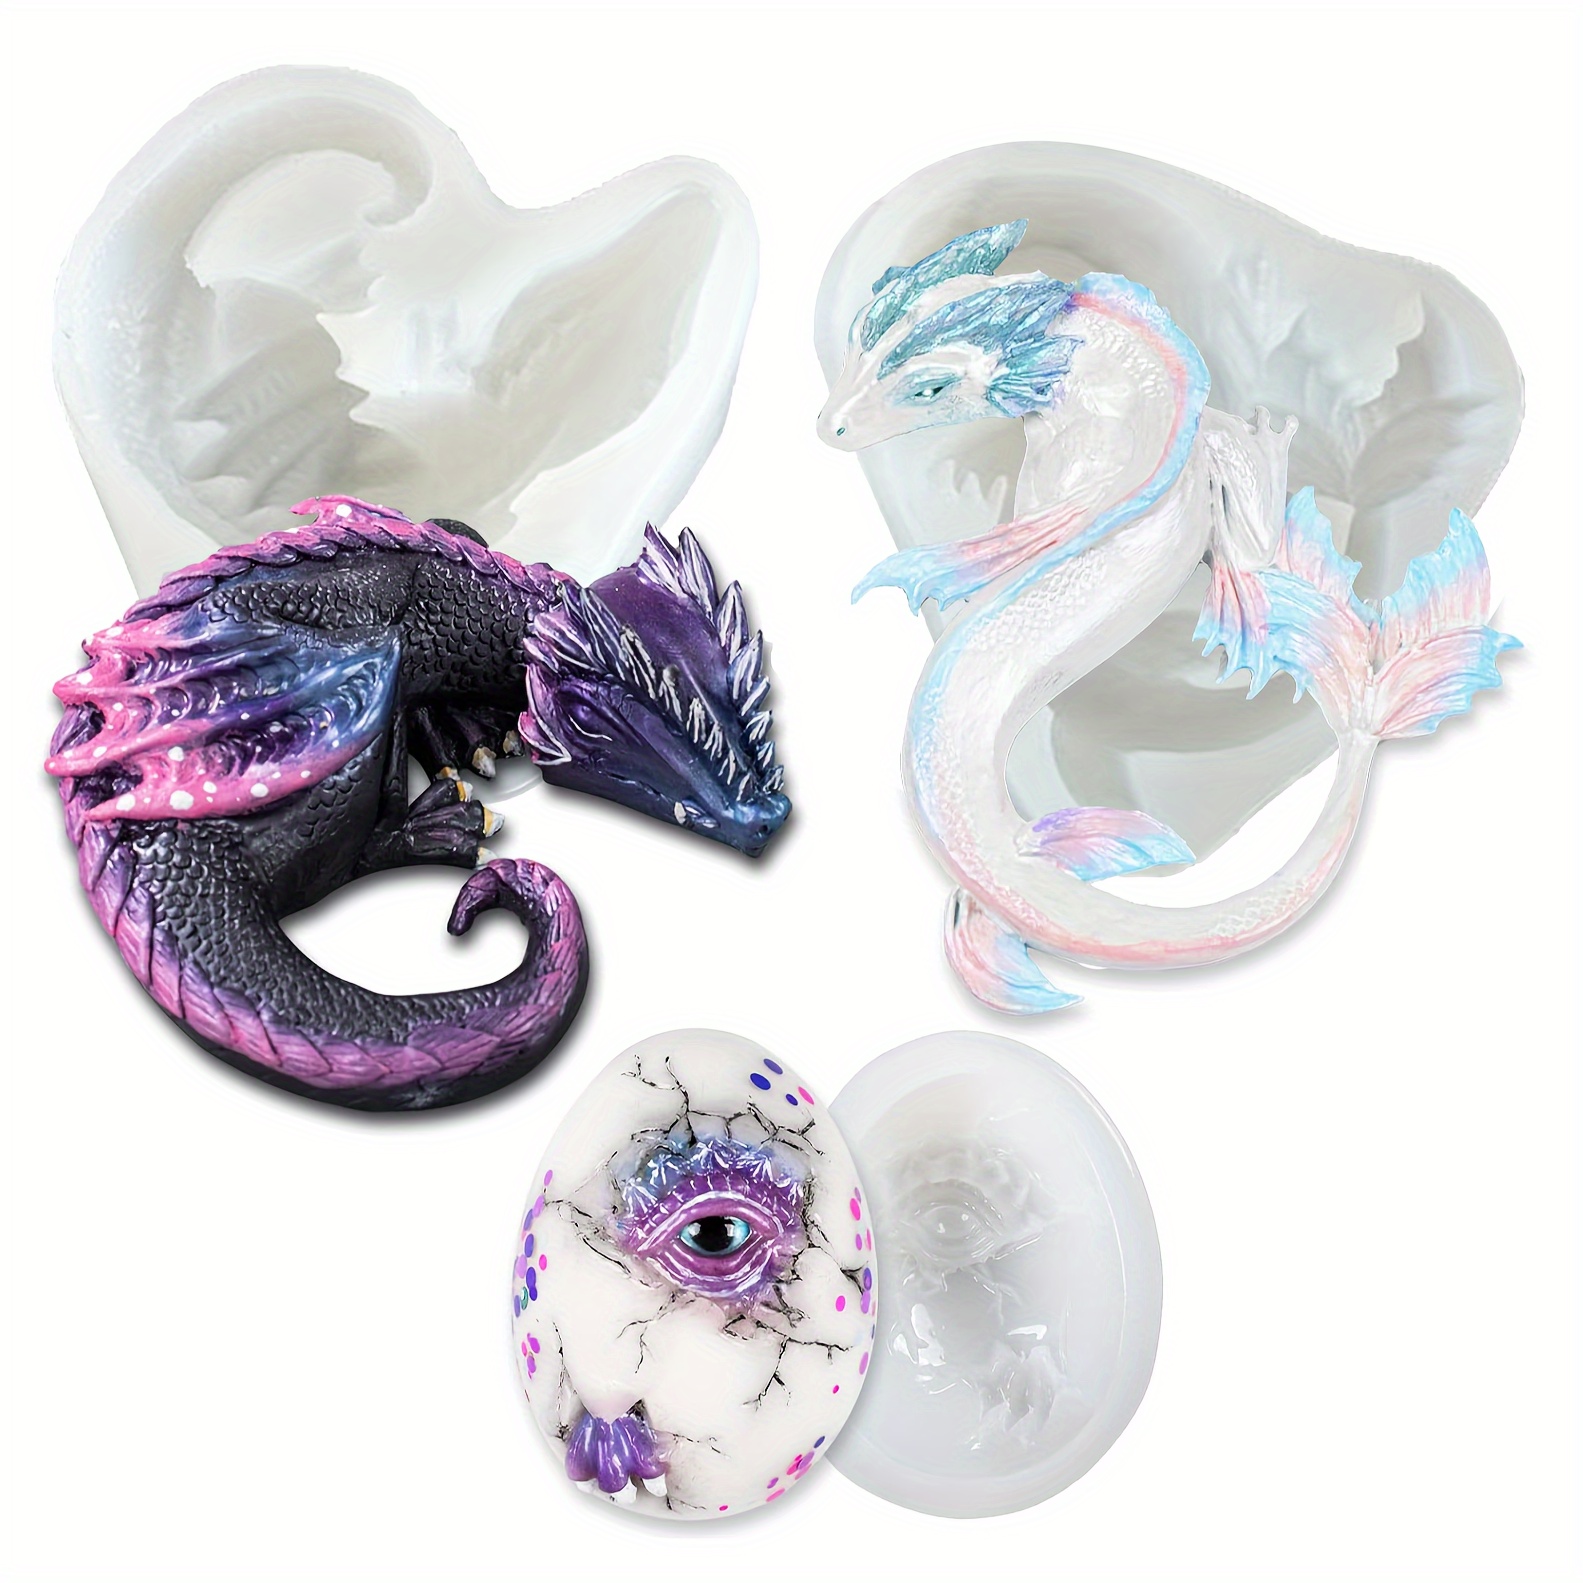 

3-piece Dragon Epoxy Resin Silicone Molds Set, Fantasy Creature Casting Kit, Diy Dragon Egg & Figurine Art, Crafting Supplies For Home Decor & Jewelry Making